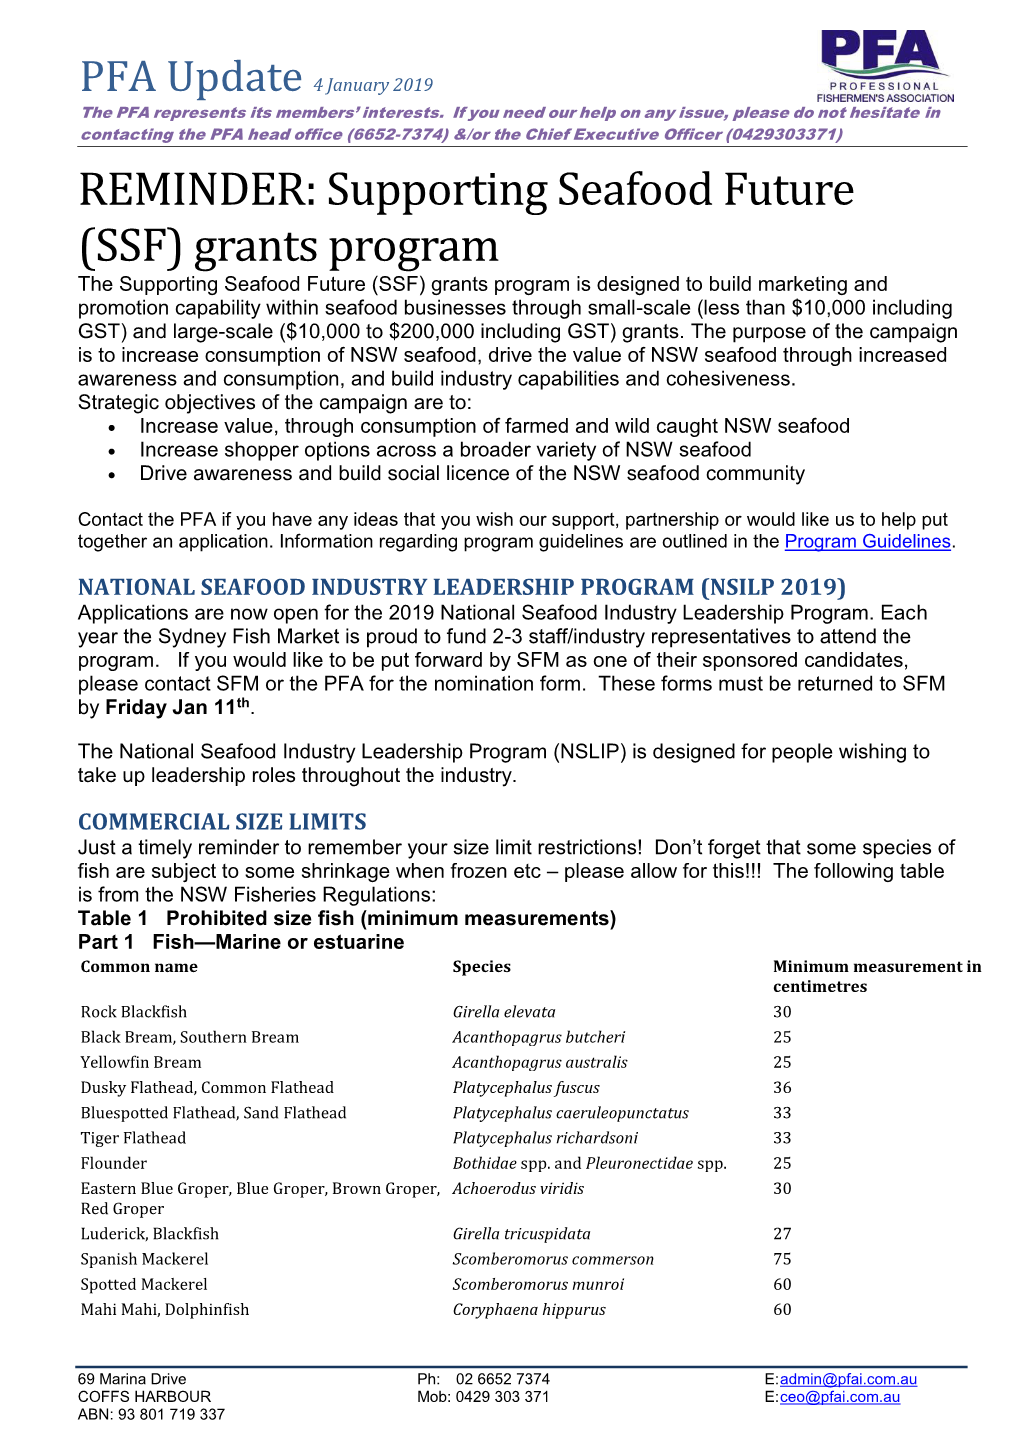 REMINDER: Supporting Seafood Future (SSF) Grants Program